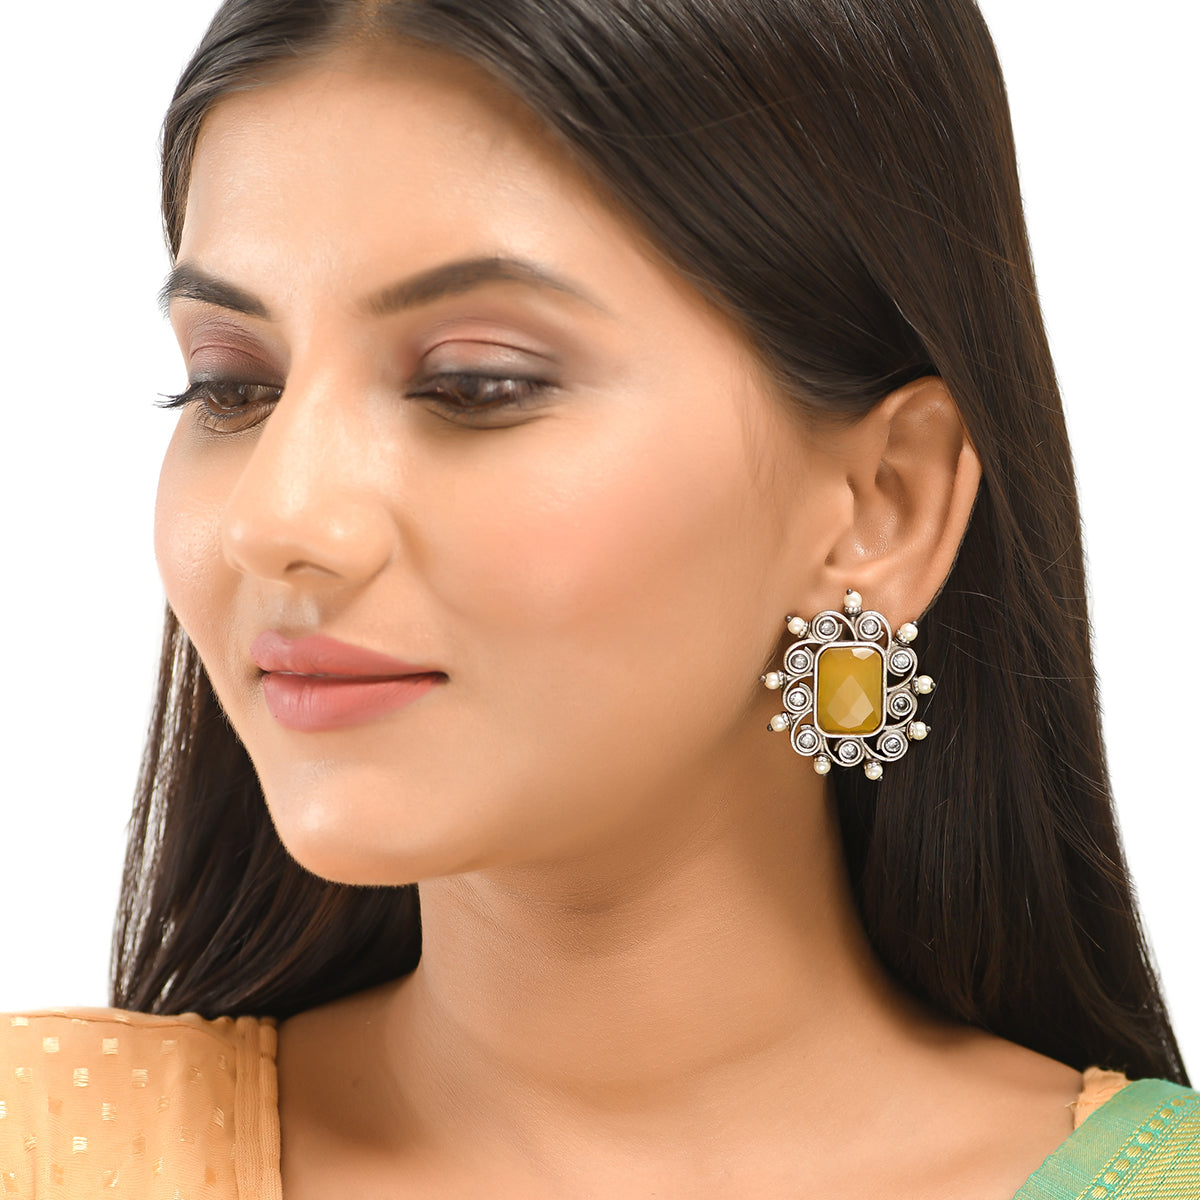 Women's Antique Elegance Square Cut Kundan And Faux Pearls Brass Silver Plated Earrings - Voylla